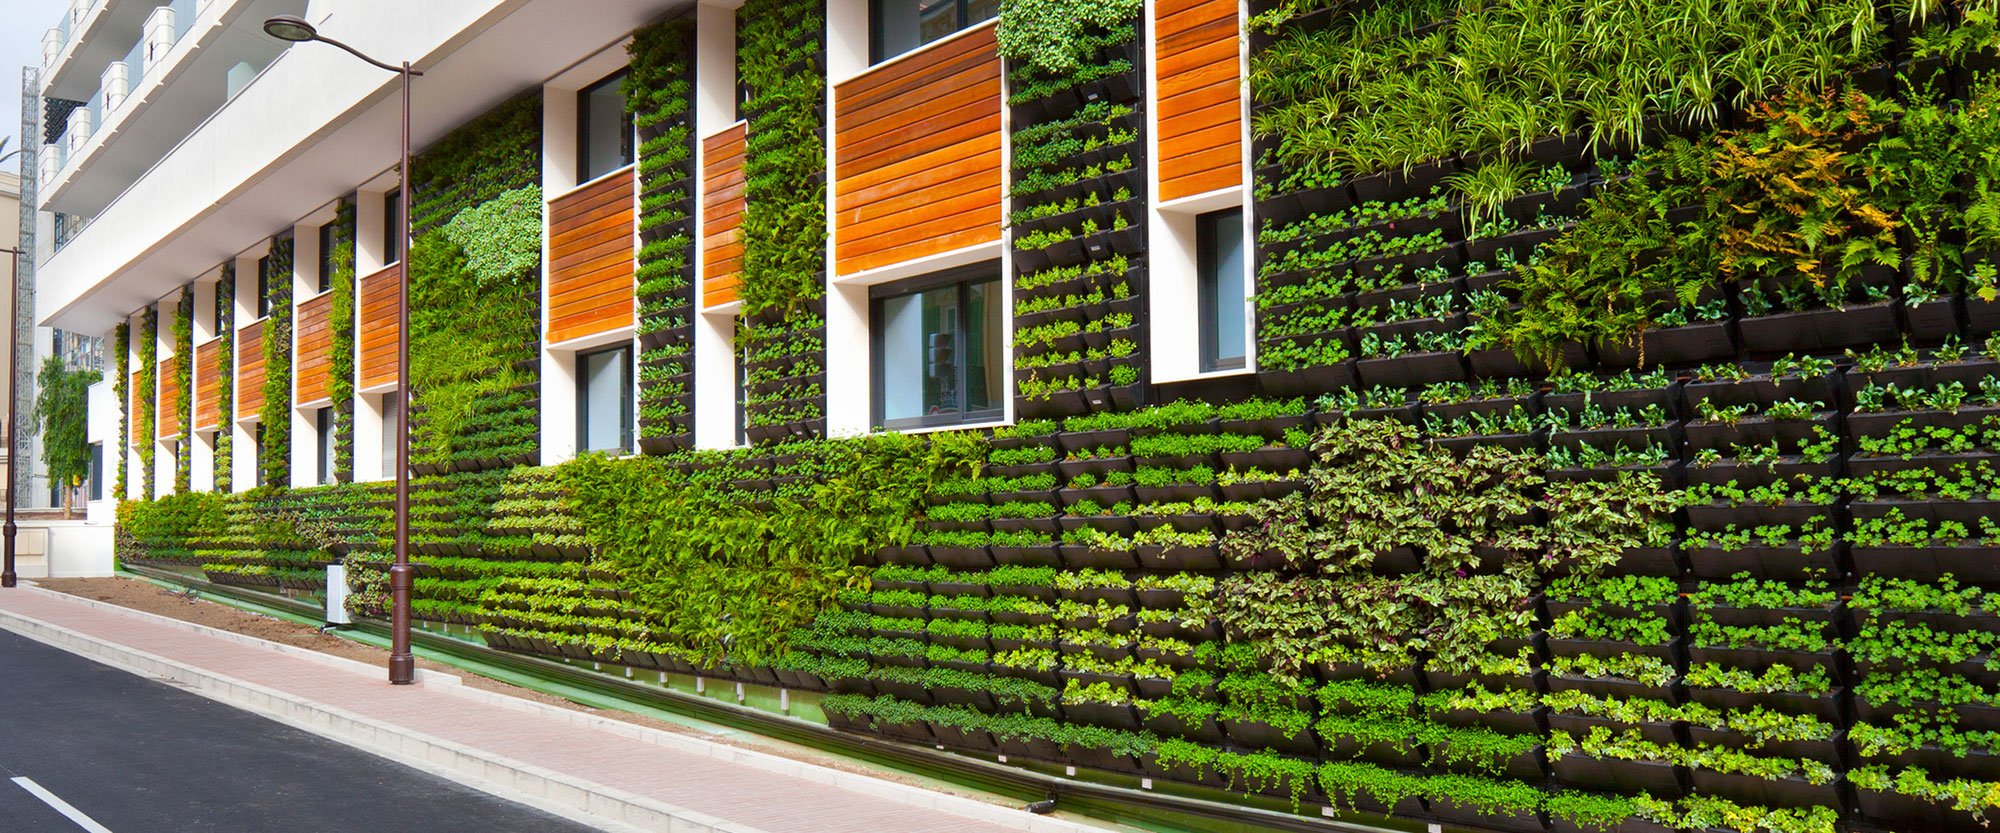 Green vegetation on walls of an office building